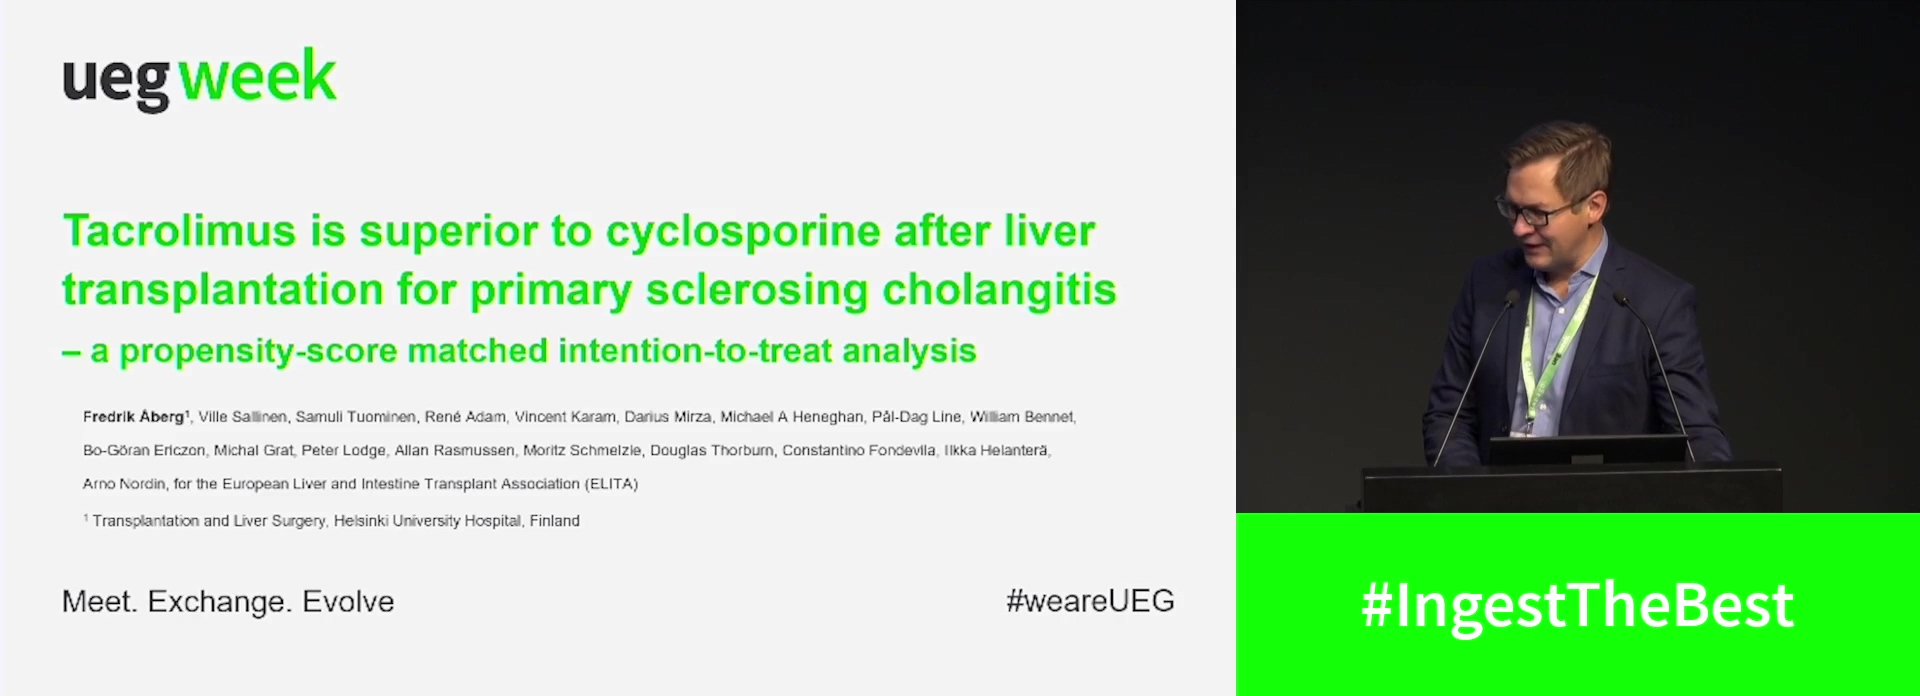 TACROLIMUS IS SUPERIOR TO CYCLOSPORINE AFTER LIVER TRANSPLANTATION FOR PRIMARY SCLEROSING CHOLANGITIS – A MULTICONTINENTAL REGISTRY-BASED PROPENSITY-SCORE MATCHED INTENTION-TO-TREAT ANALYSIS